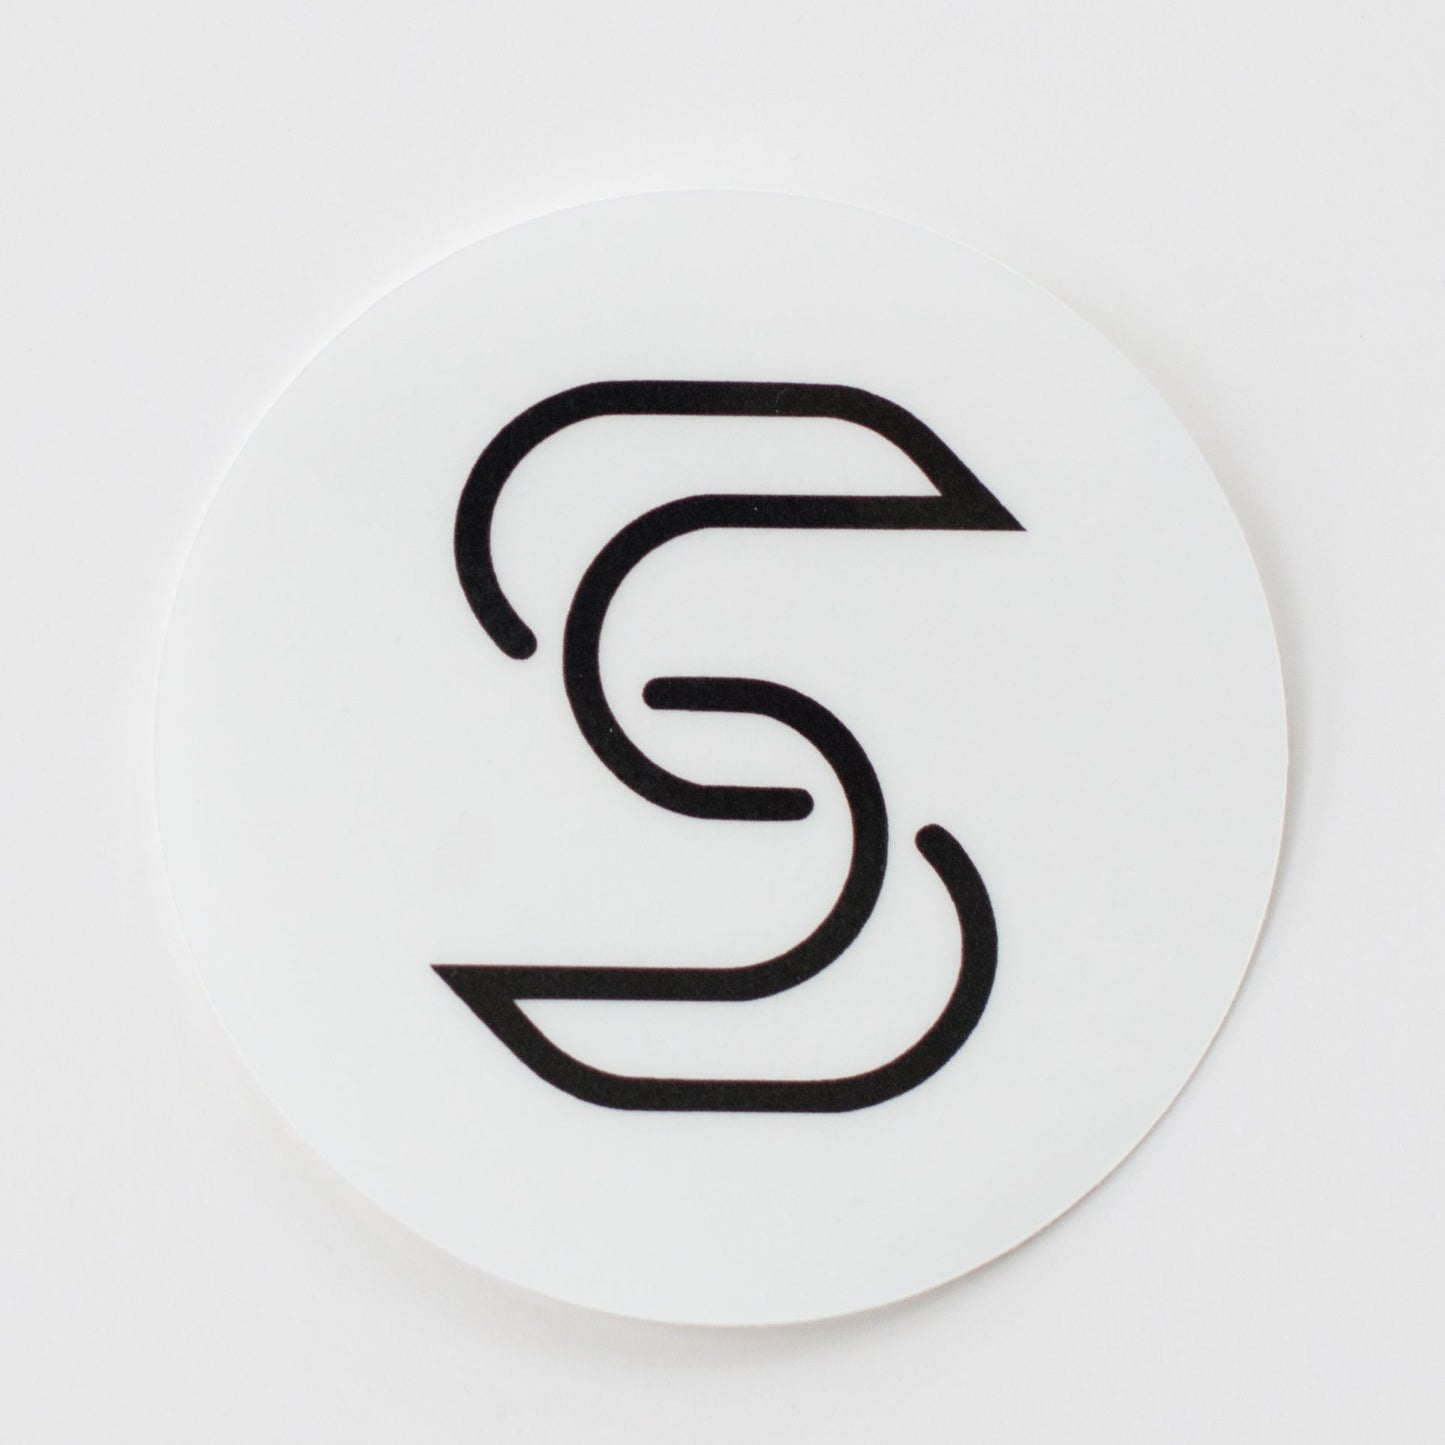 A circular, clear sticker of a black Stickr logo in front of a white background